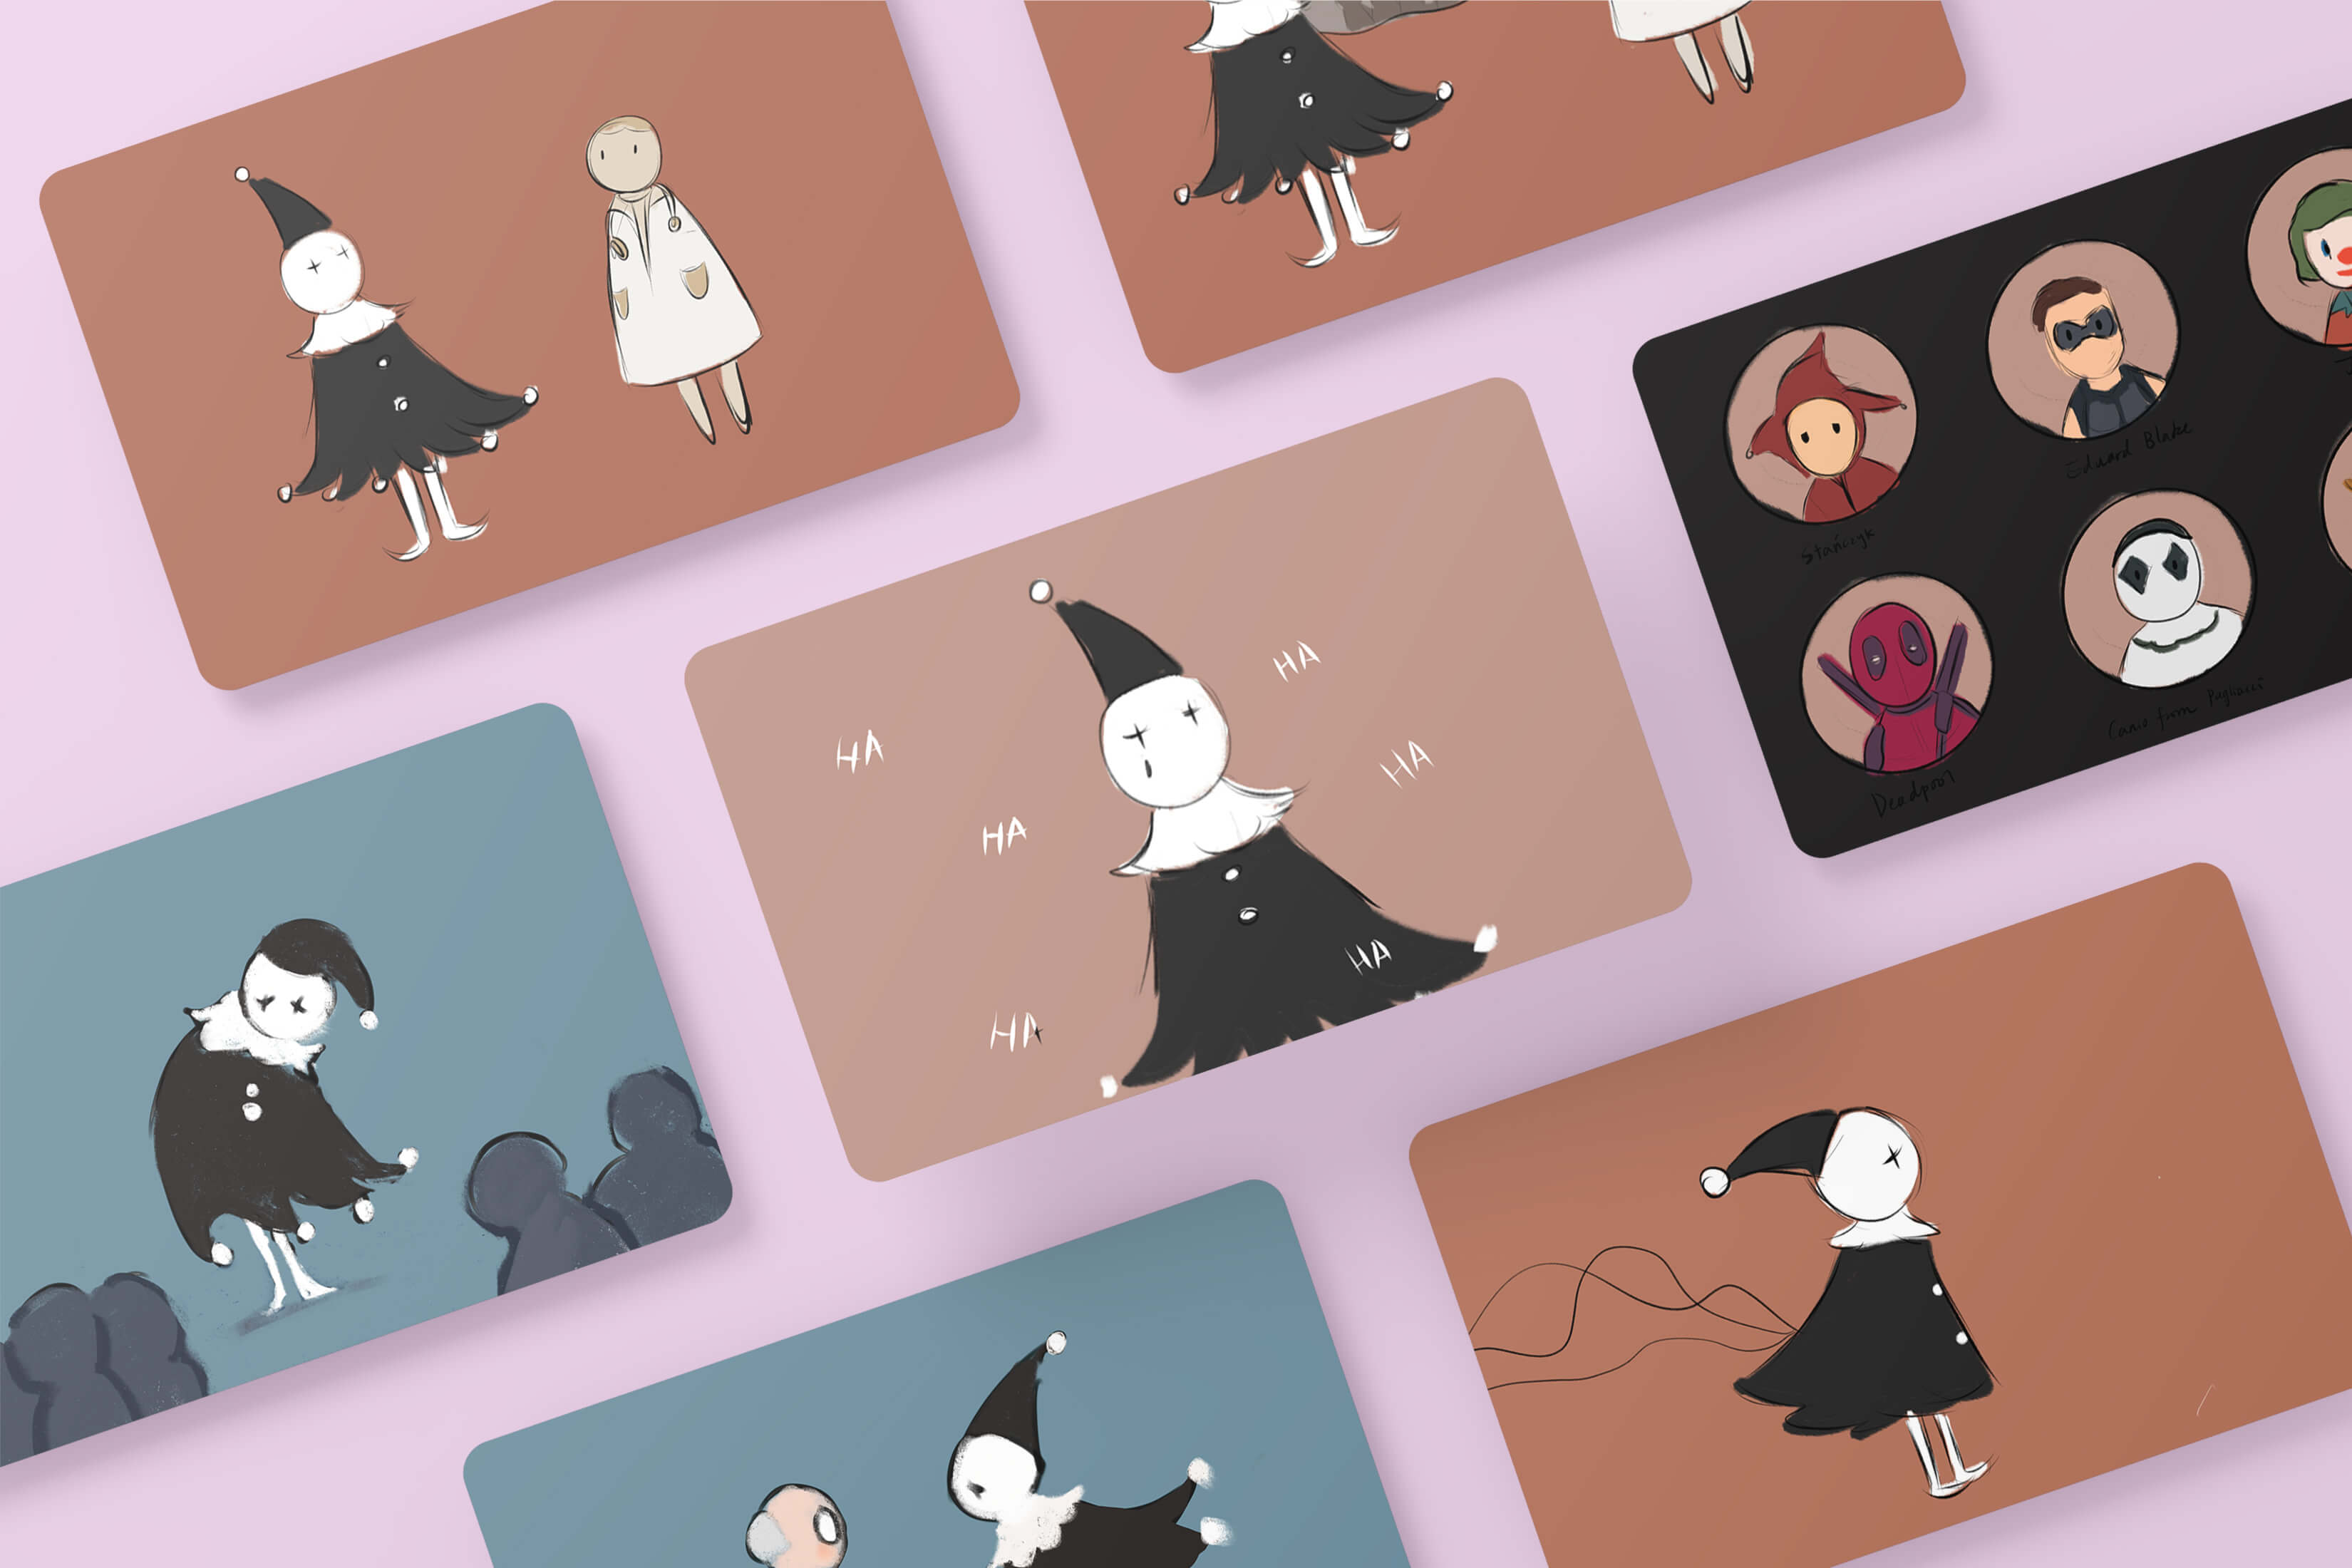 mock up of cards from scenes of an animation